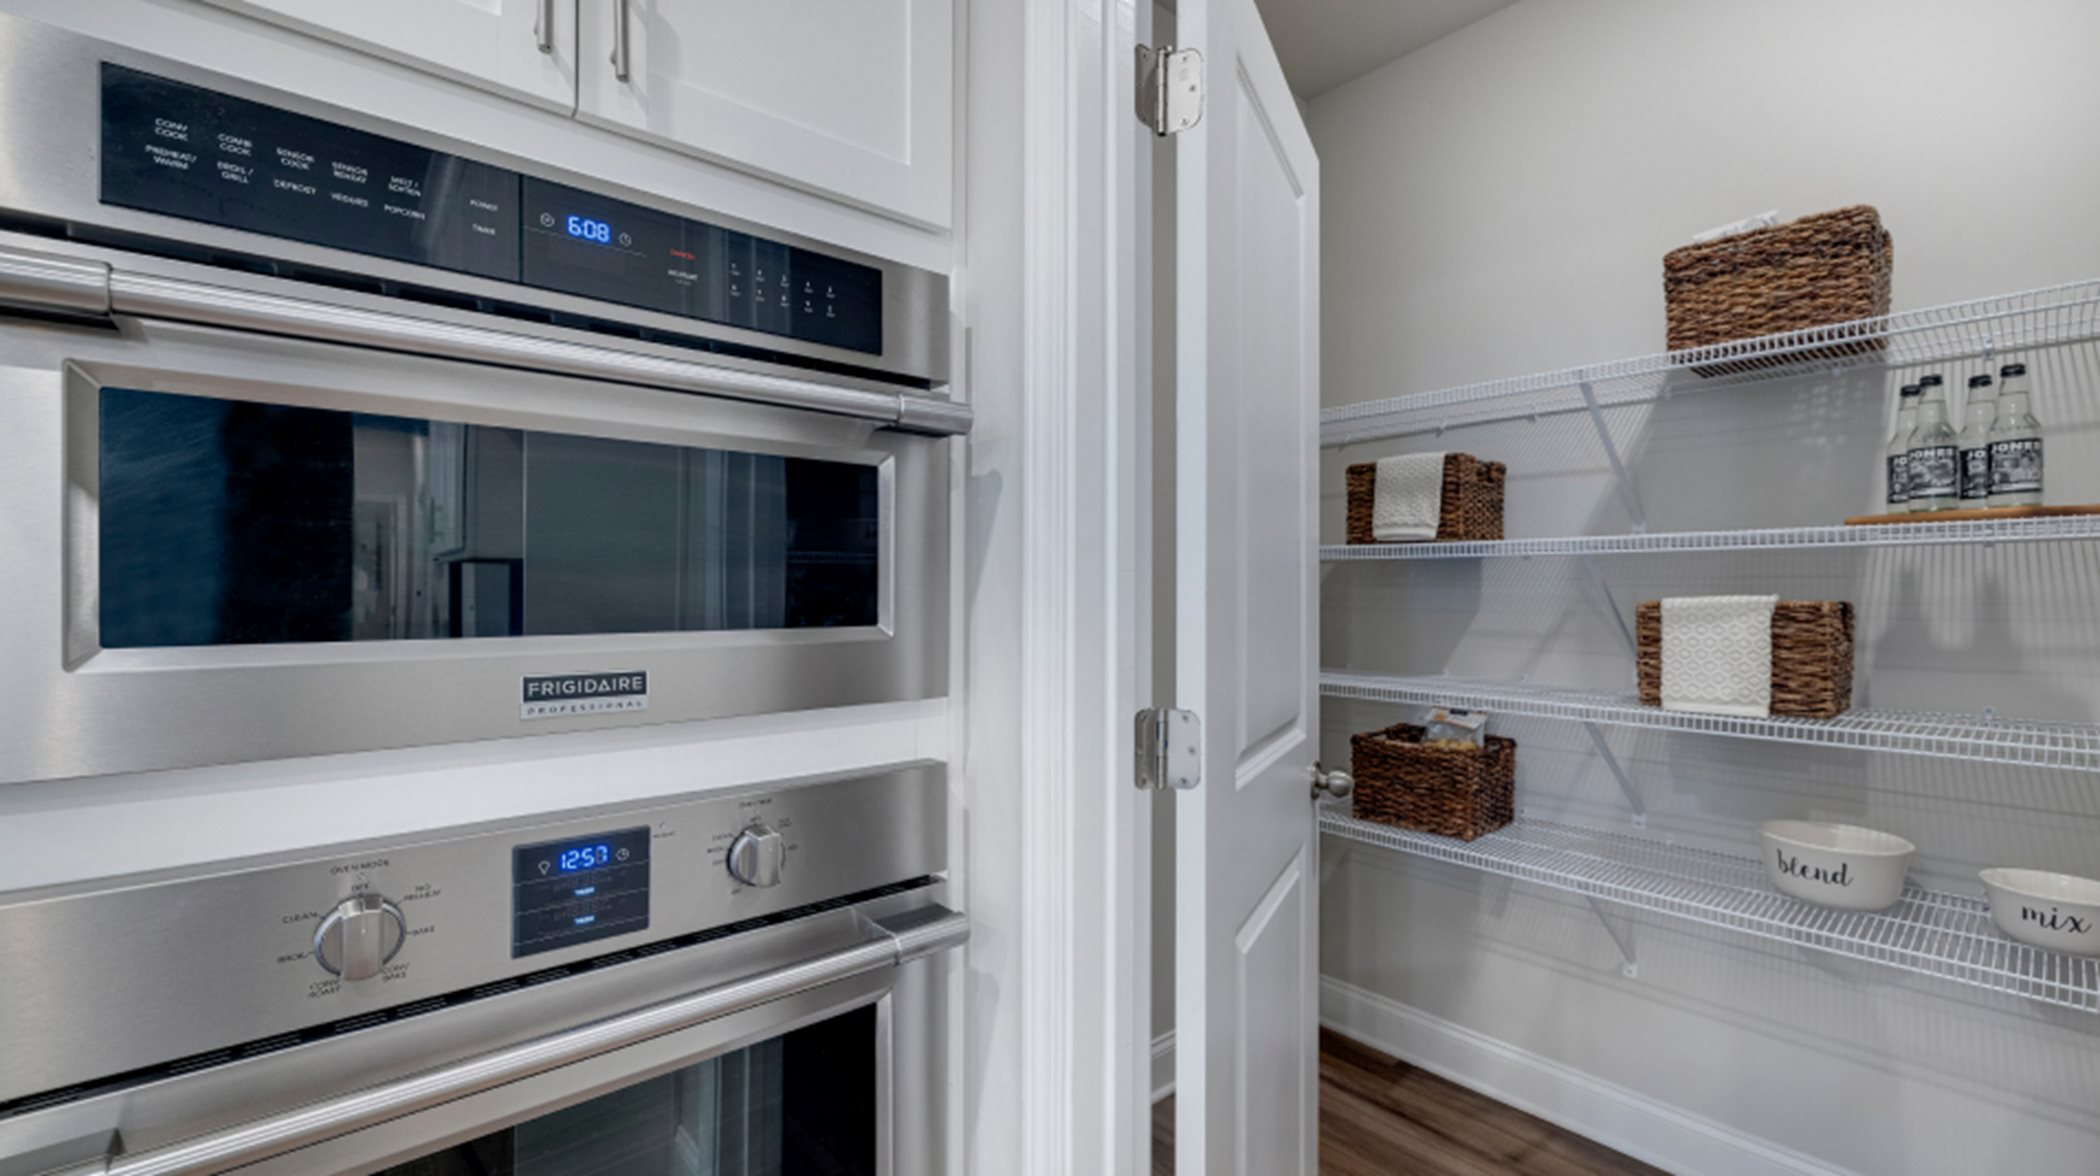 Crestwood Kitchen Oven and pantry